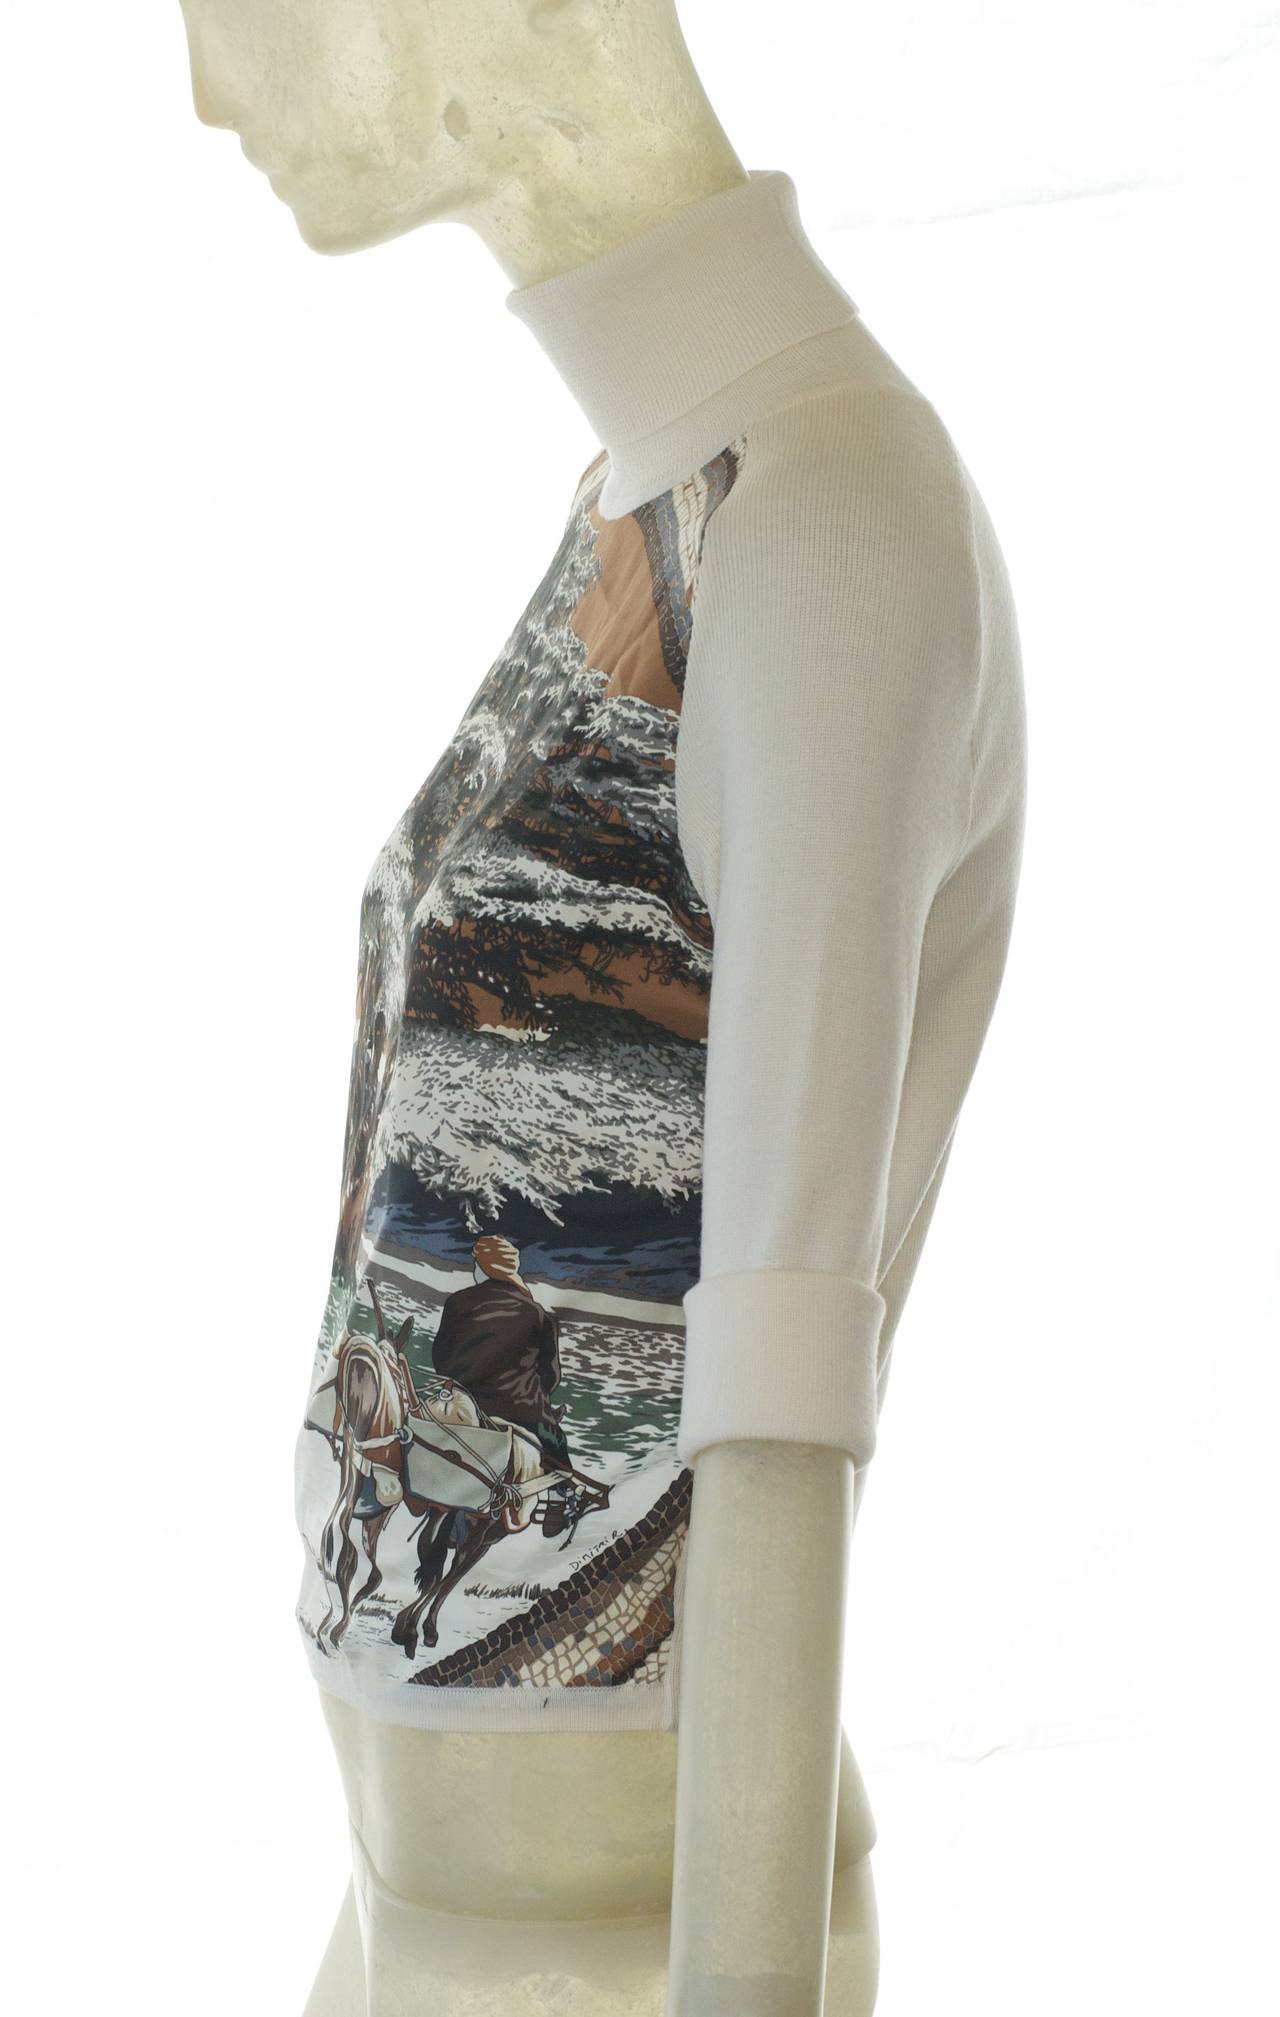 A lovely Hermes silk and fine, soft, lightweight wool sweater with a winter snow scene ny Dimitri Rybaltchenko is a perfect addition to your holiday and winter wardrobe of a bucloic scene of horses, goat herders and an ancient tree with snow covered